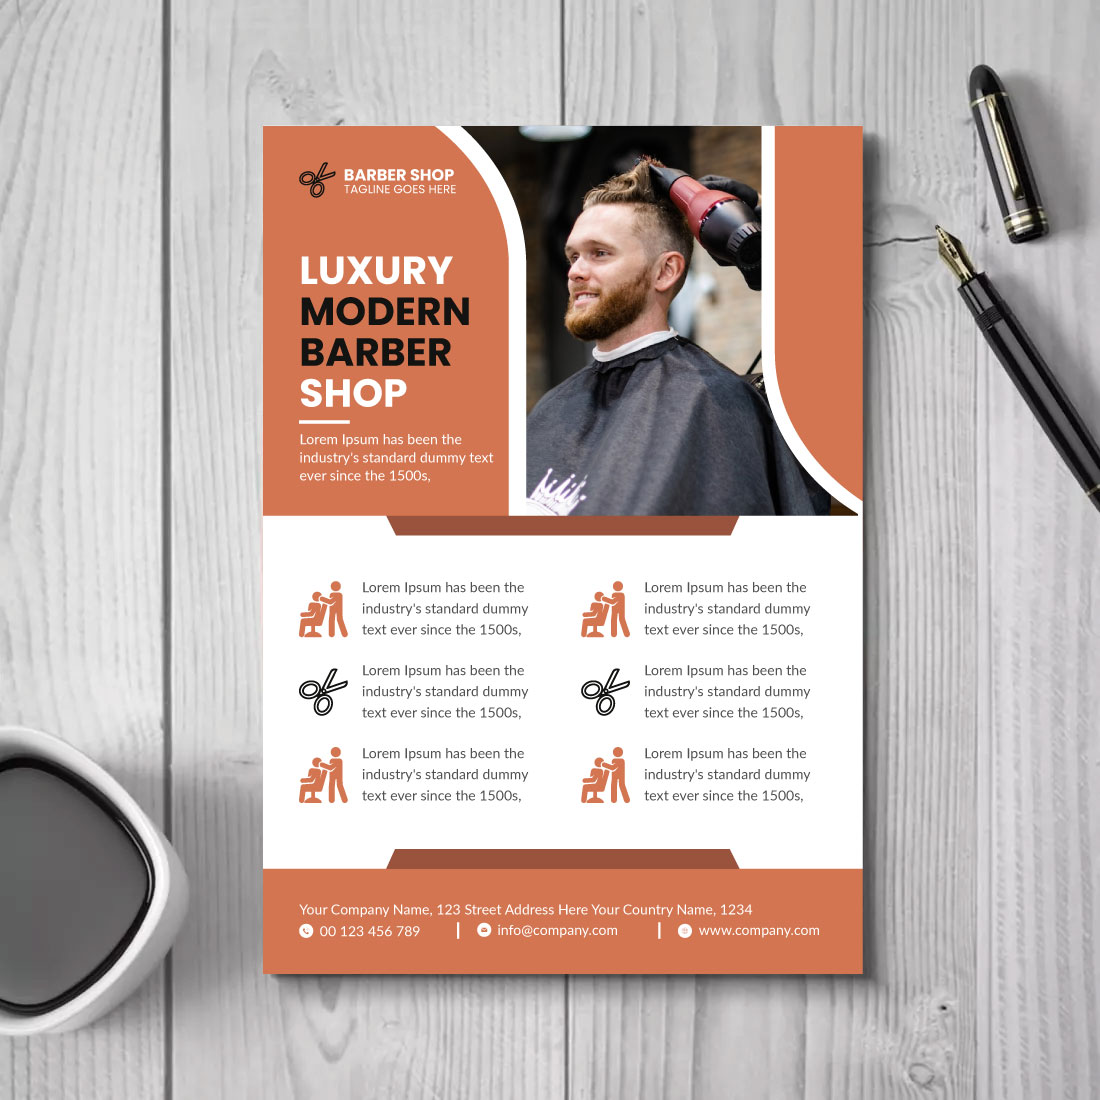 06 Luxury Barber Shop Flyer Or Poster Template image preview.